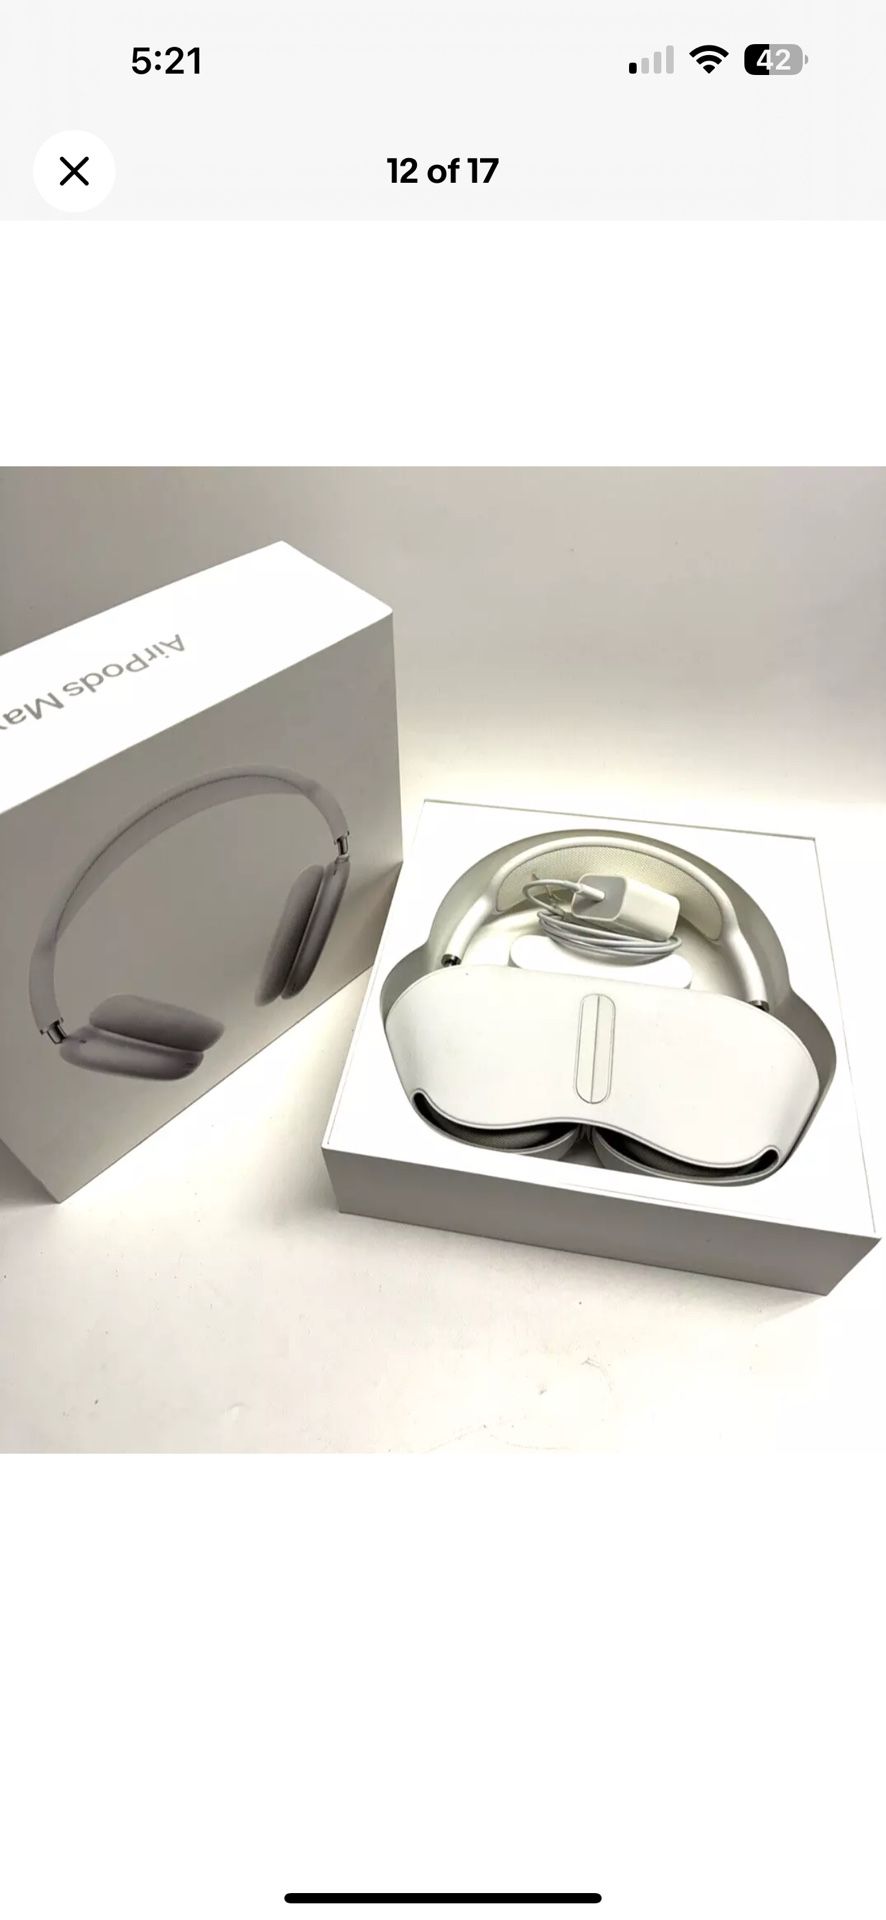 Apple AirPods Max Wireless Over-Ear Headset - Silver